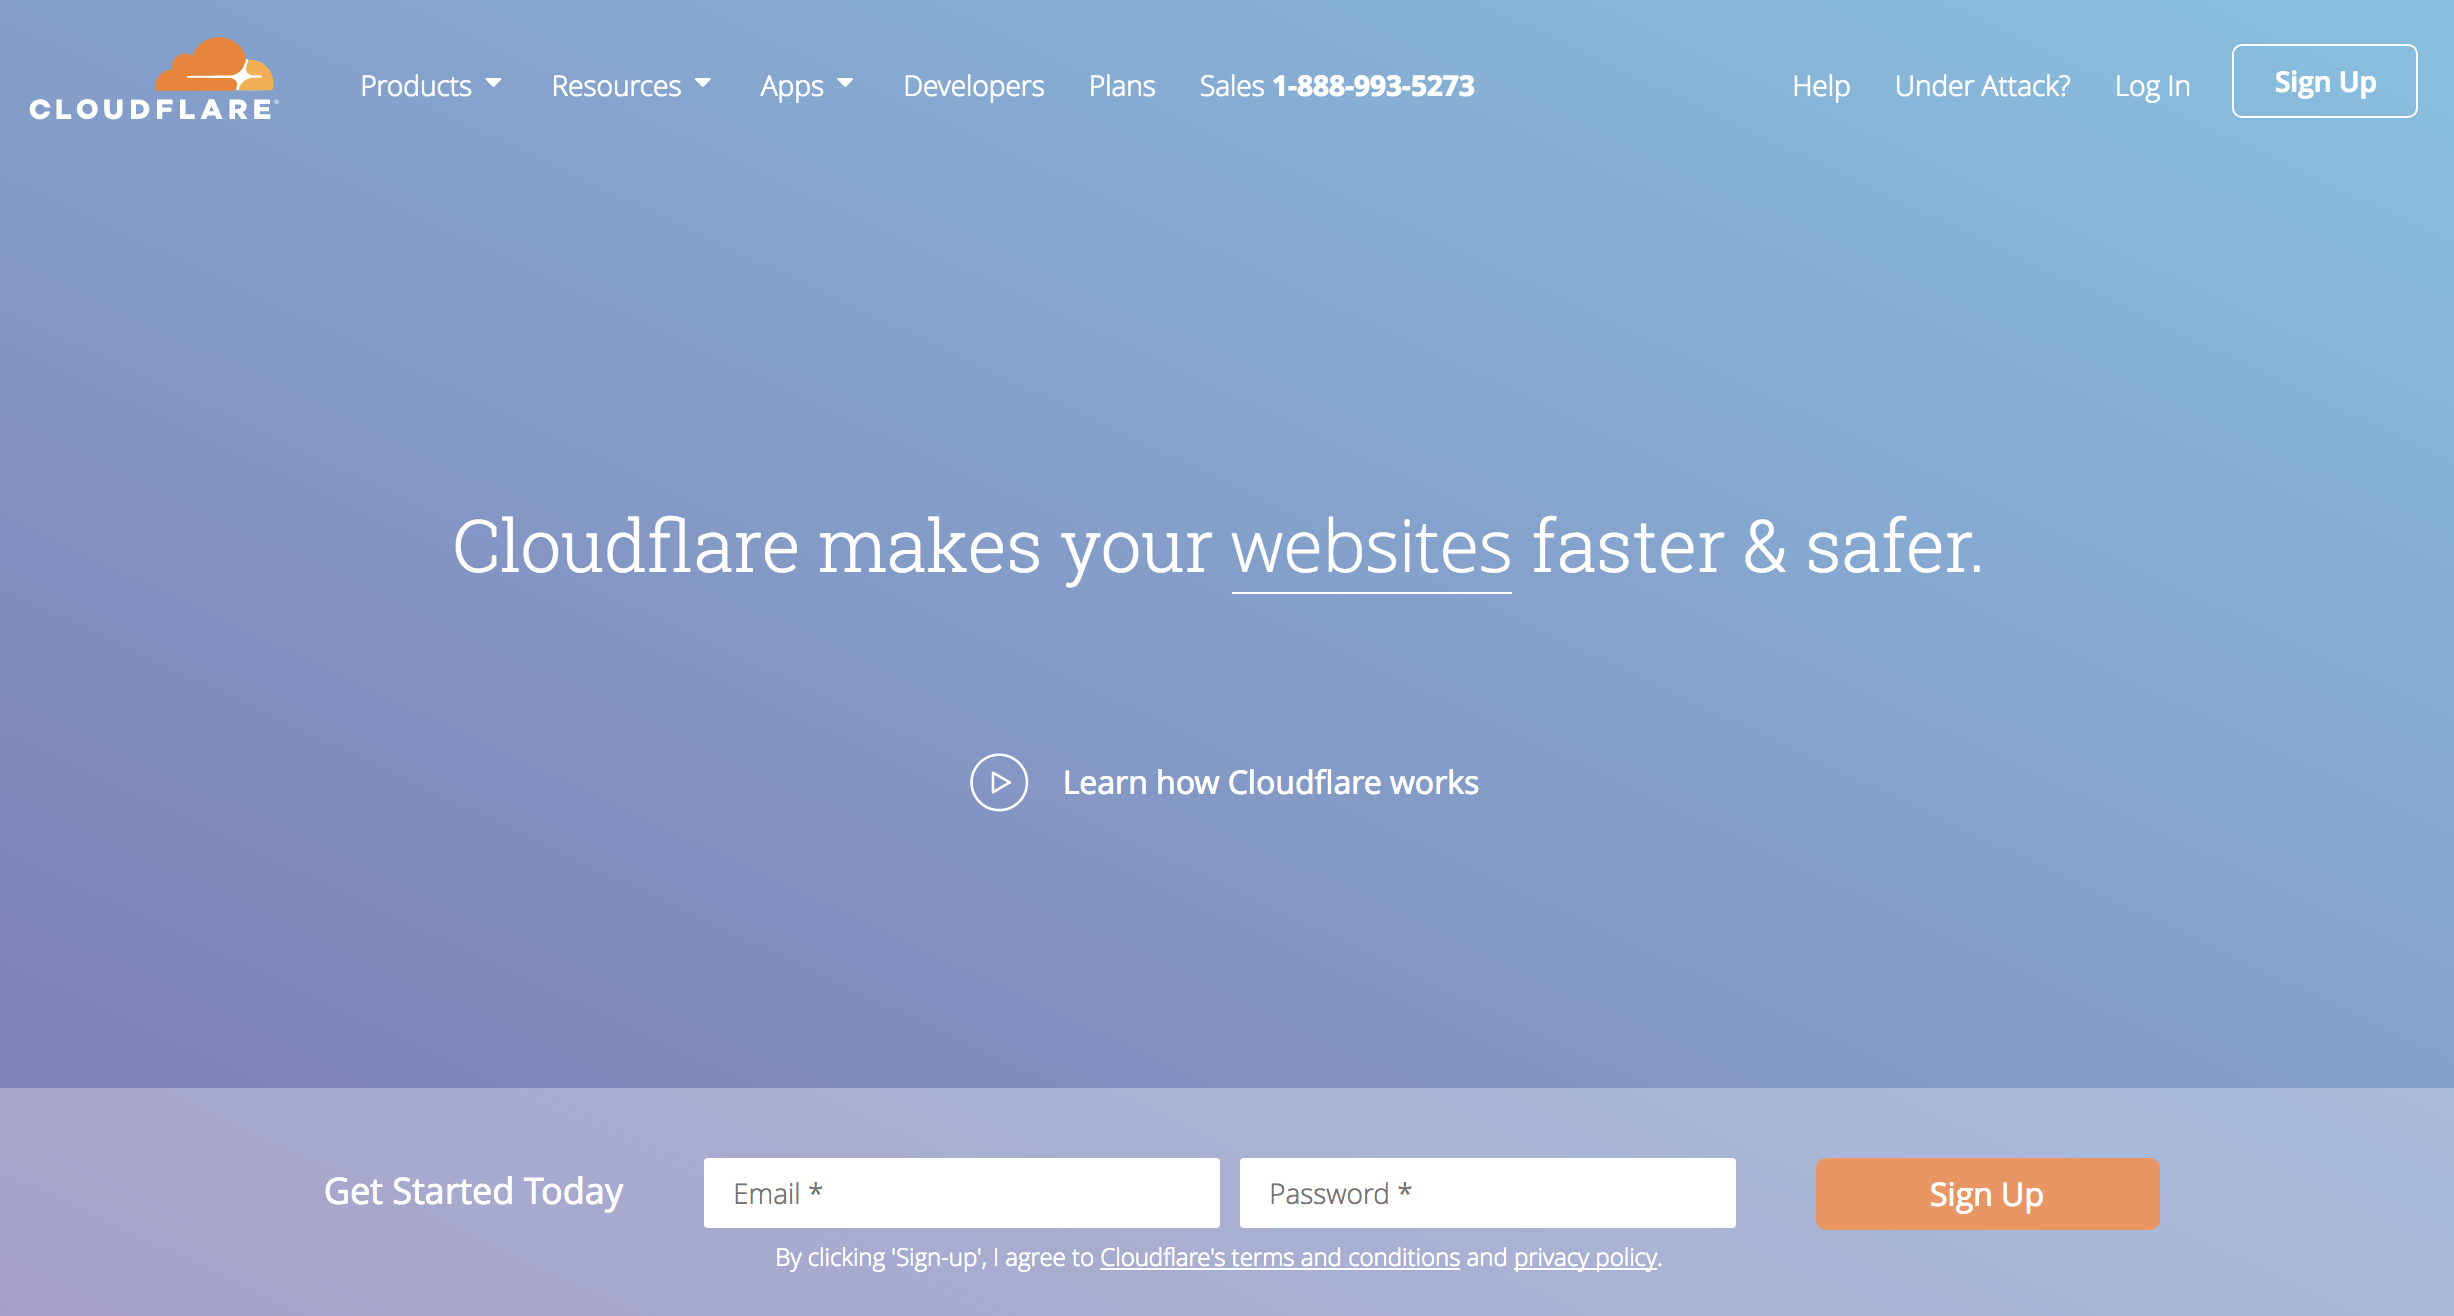 The cloudflare.com home page.